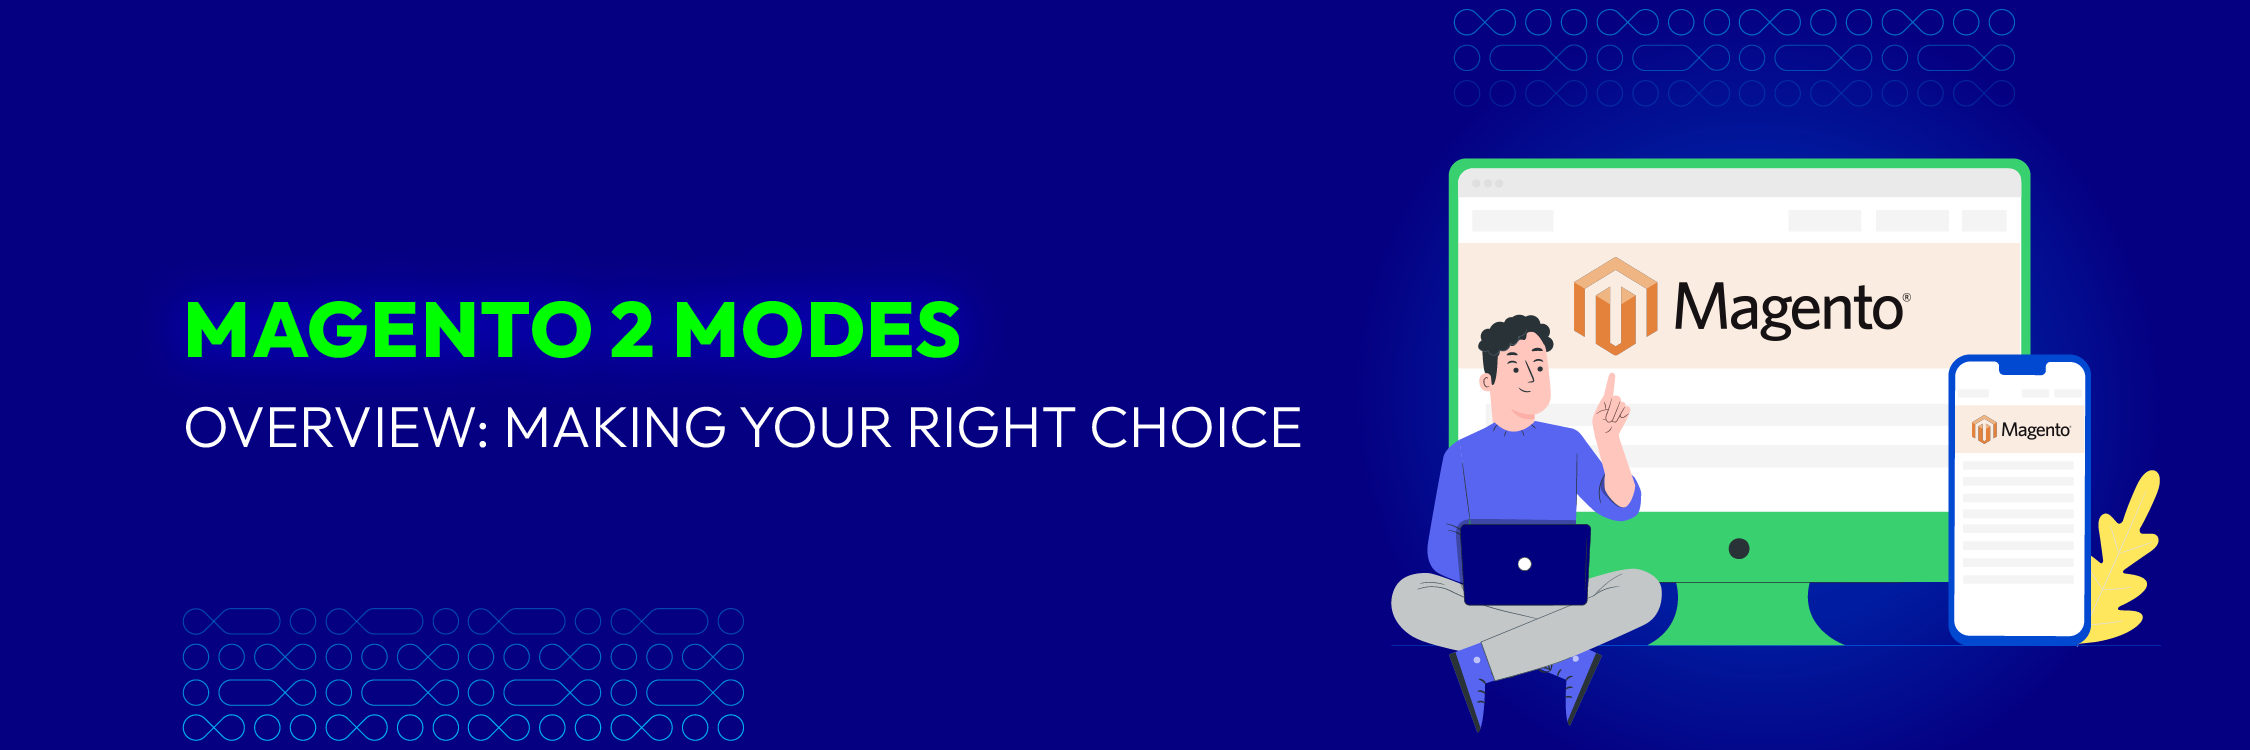 Magento 2 Modes Overview: Making Your Right Choice